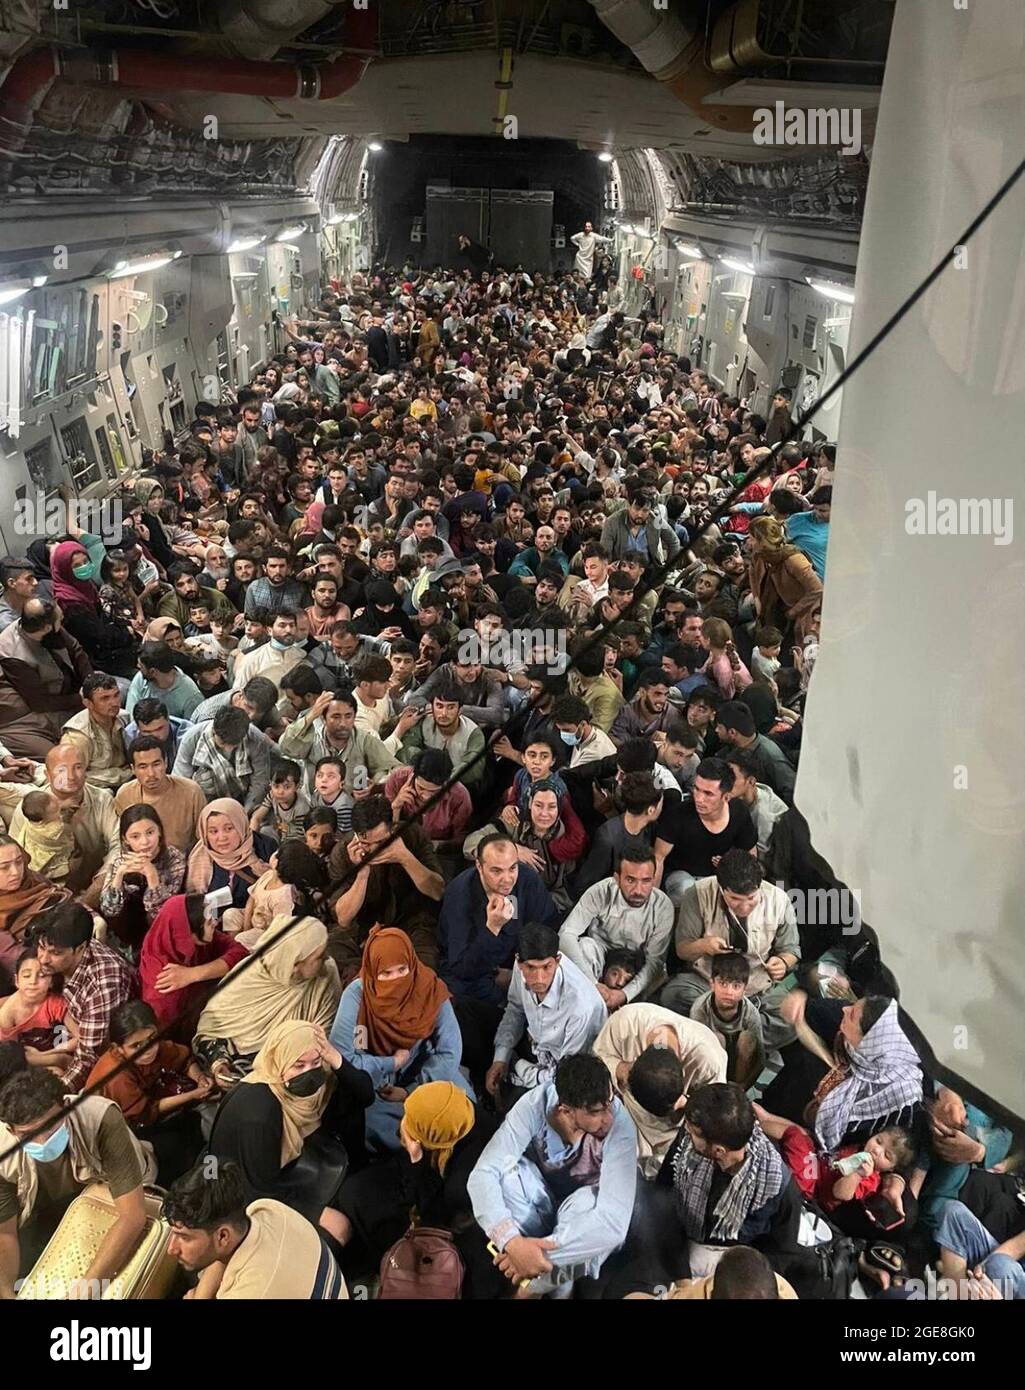 Approximately 640 Afghan citizens pack inside a United States Air Force C-17 Globemaster III, to be safely transported from Hamid Karzai International Airport in Afghanistan, Sunday, August 15, 2021. Photo by Chris Herbert/U.S. Air Force via CNP/ABACAPRESS.COM Stock Photo